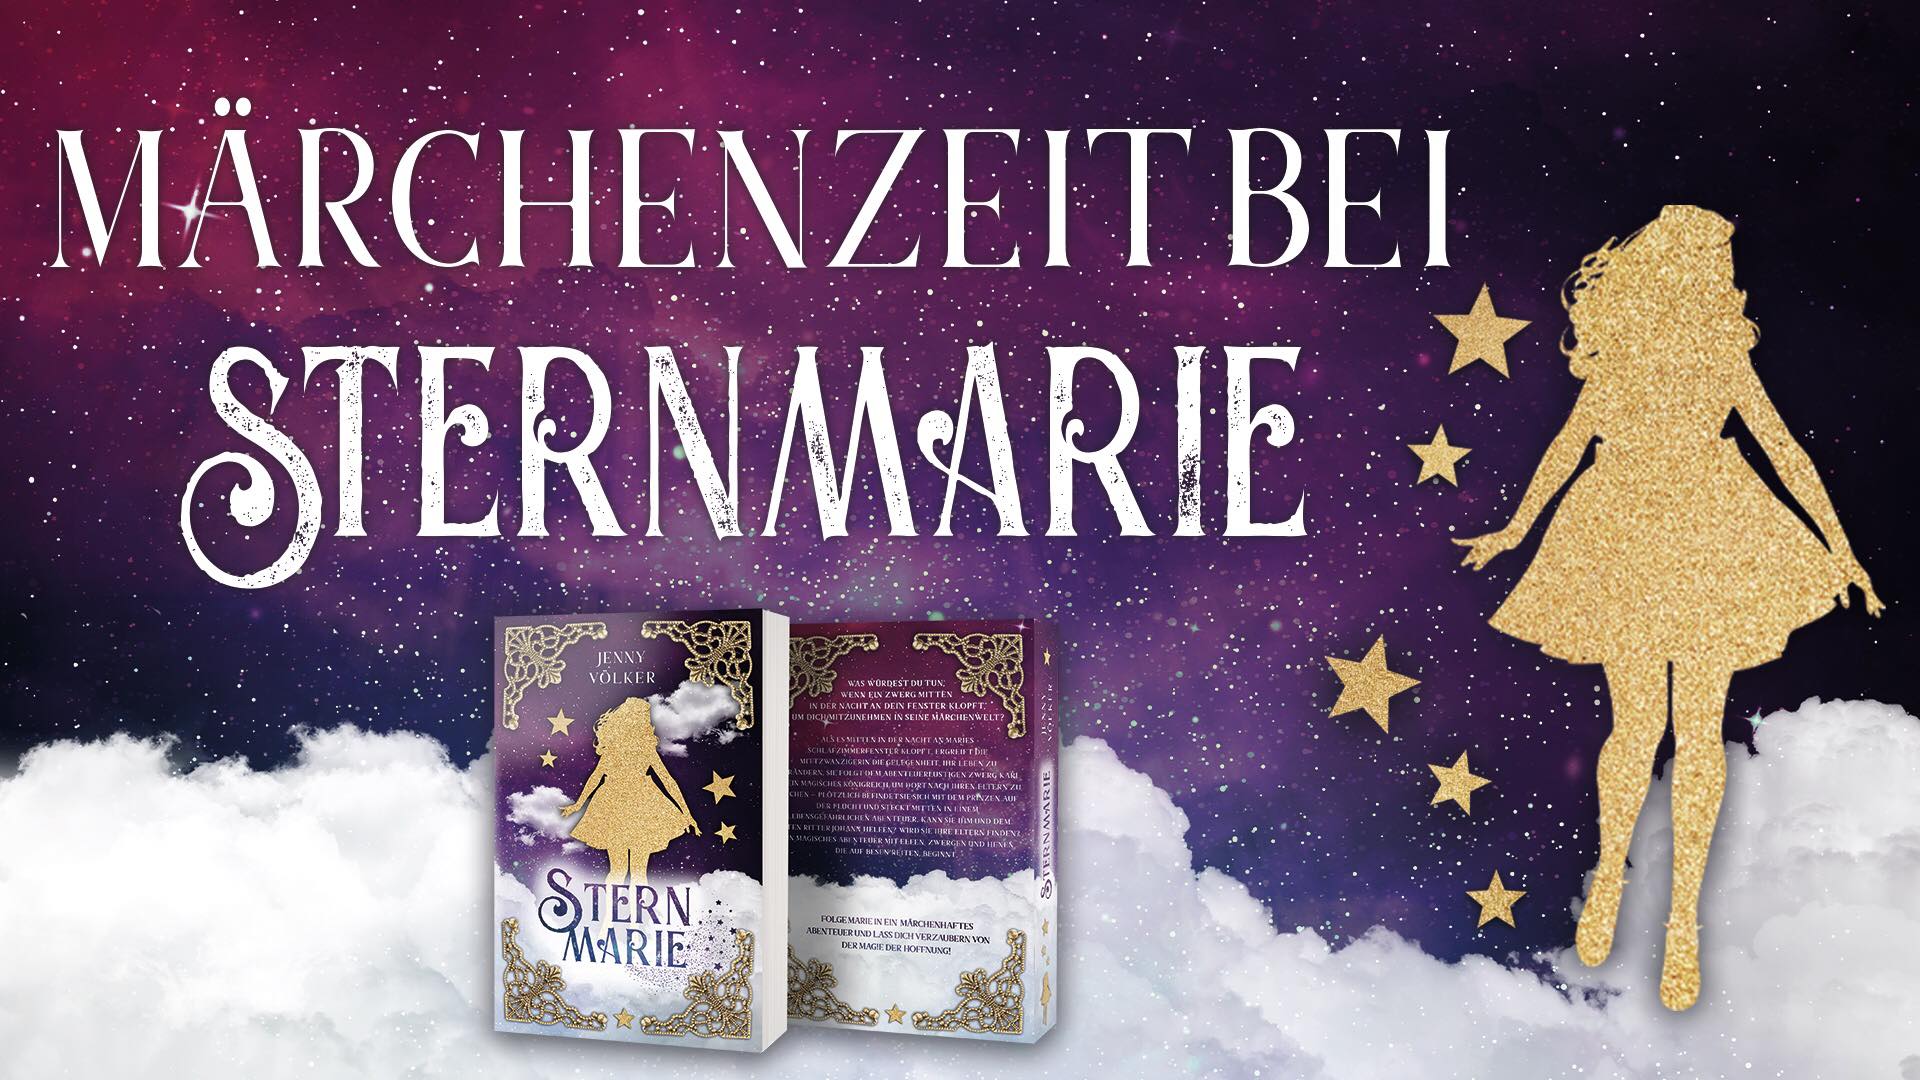 You are currently viewing Märchenzeit bei „Sternmarie“ 04